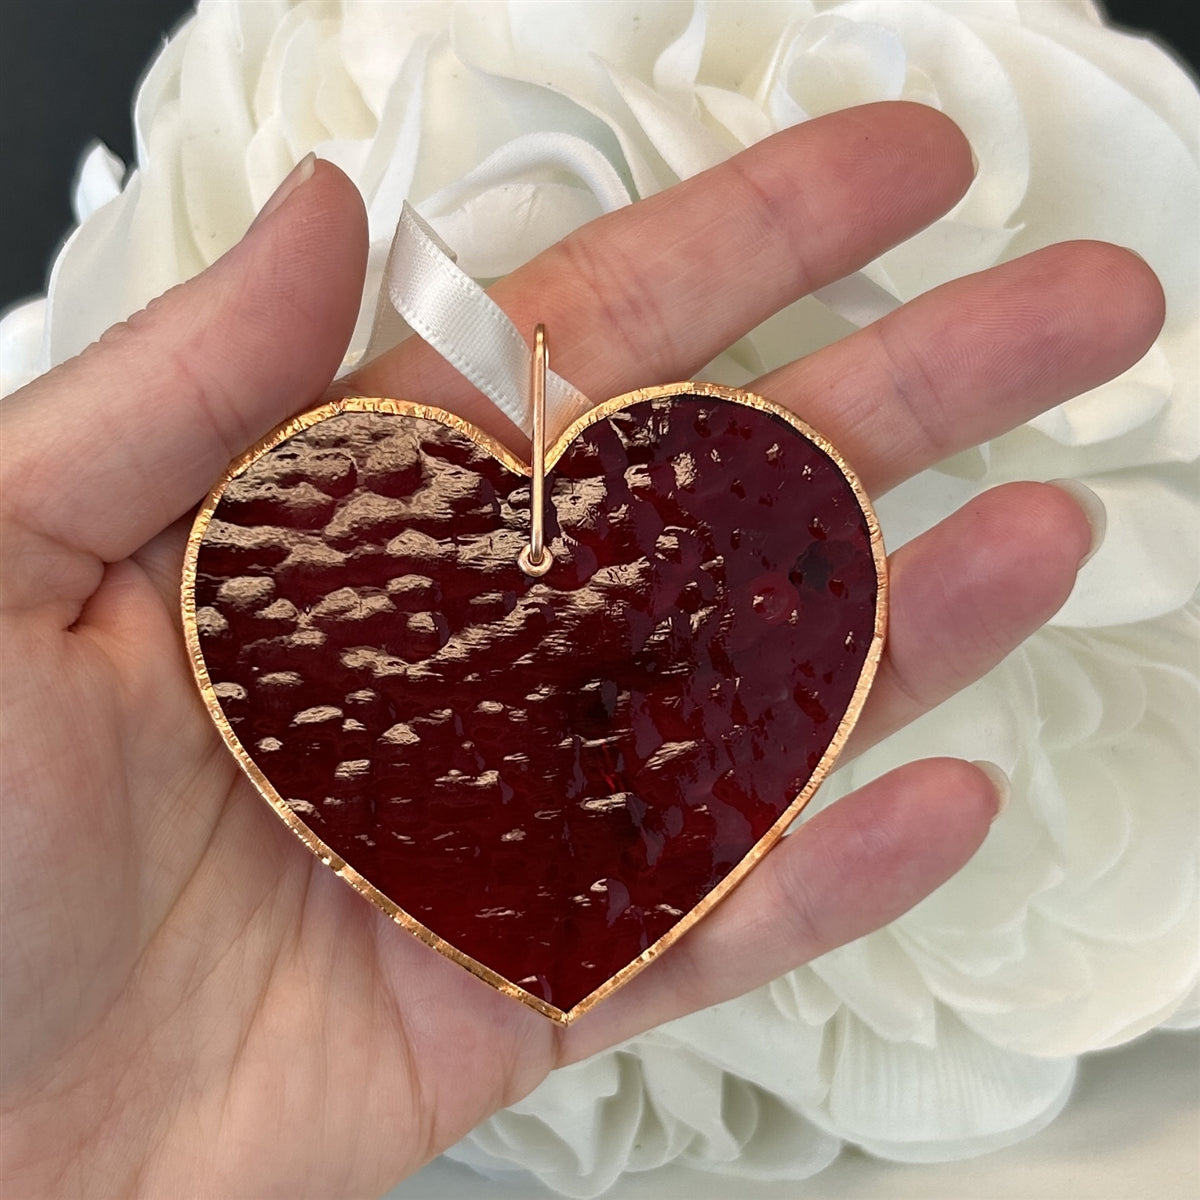 Red stained glass heart being held in a hand.